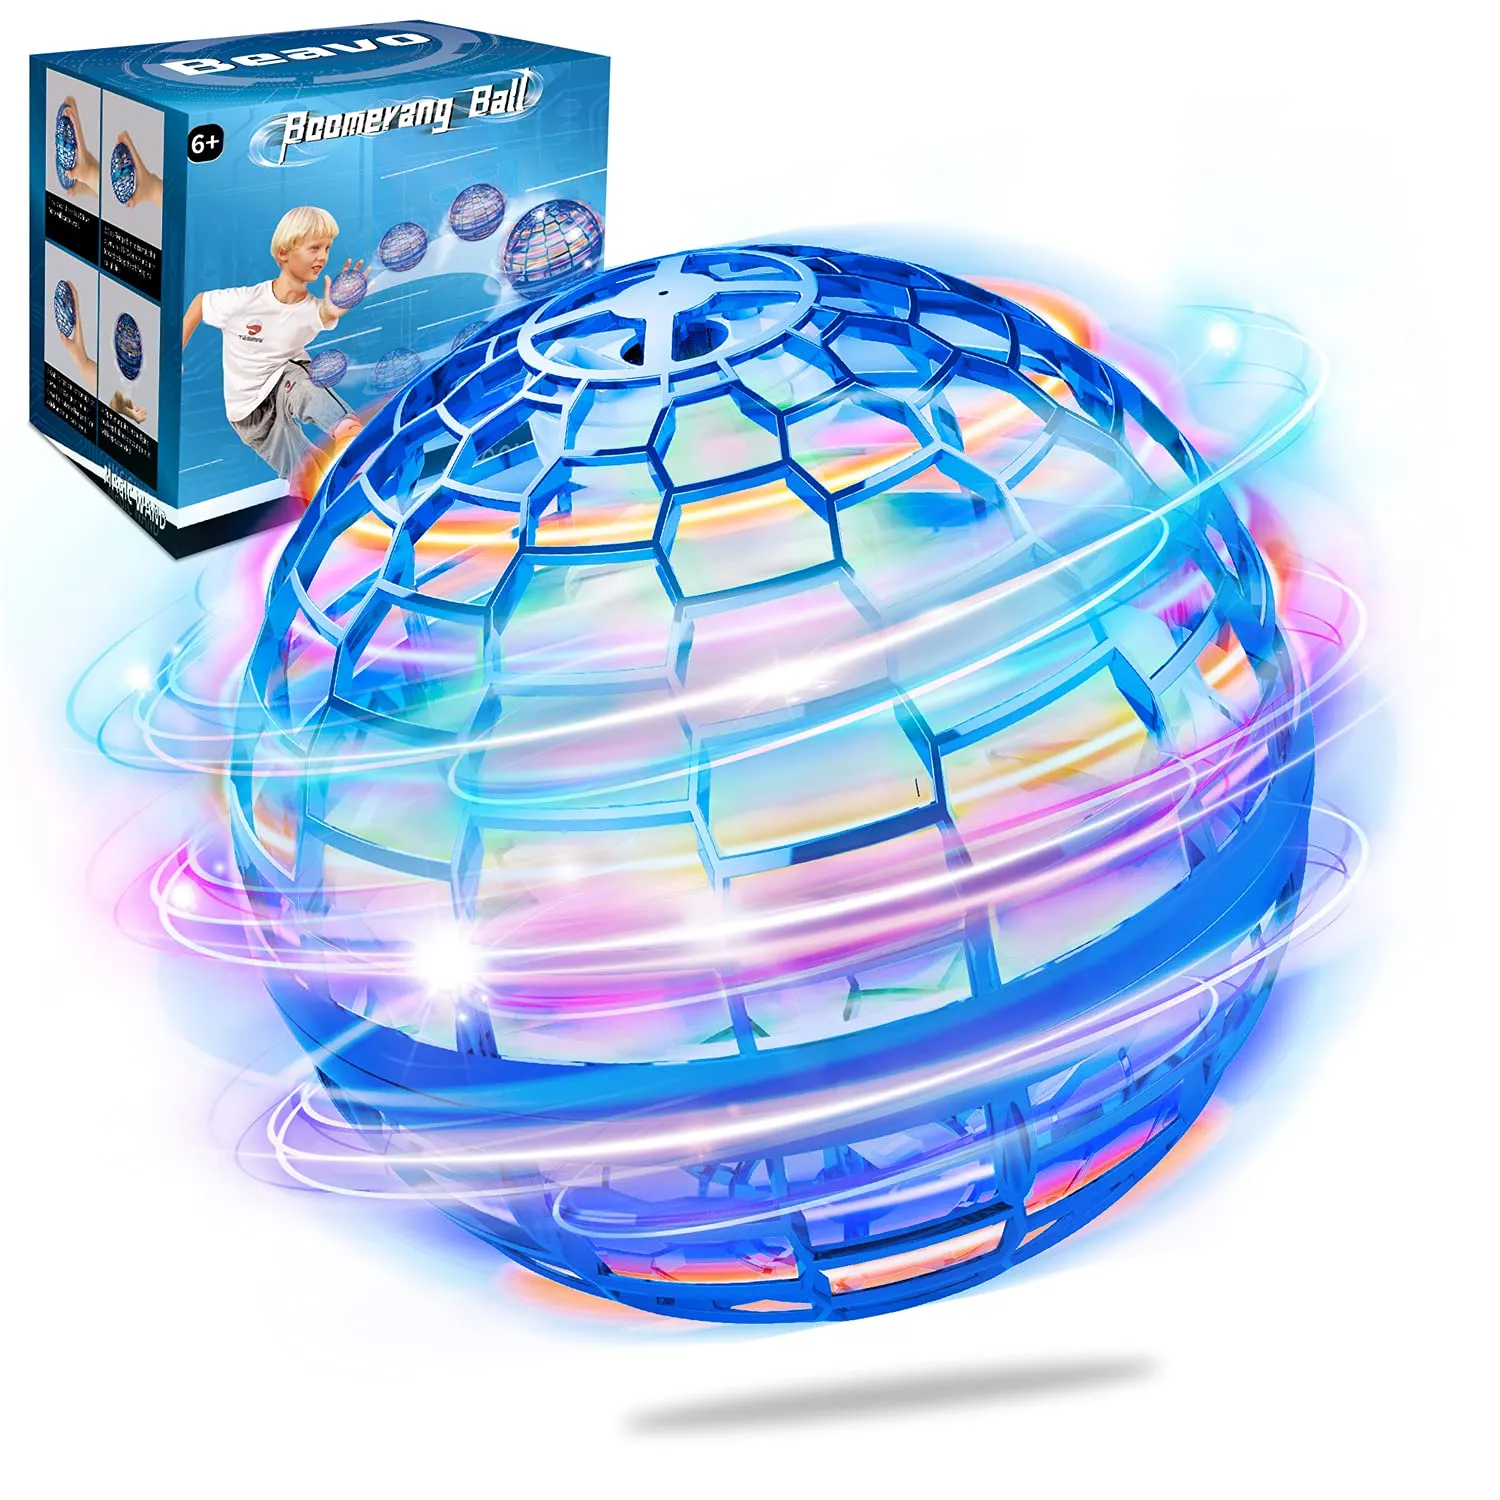 flying ball orb hover ball flying toys for kids adults flying orb magic with led light 360ﾰrotating outdoor indoor hot toys for birthday christmas 2021 b